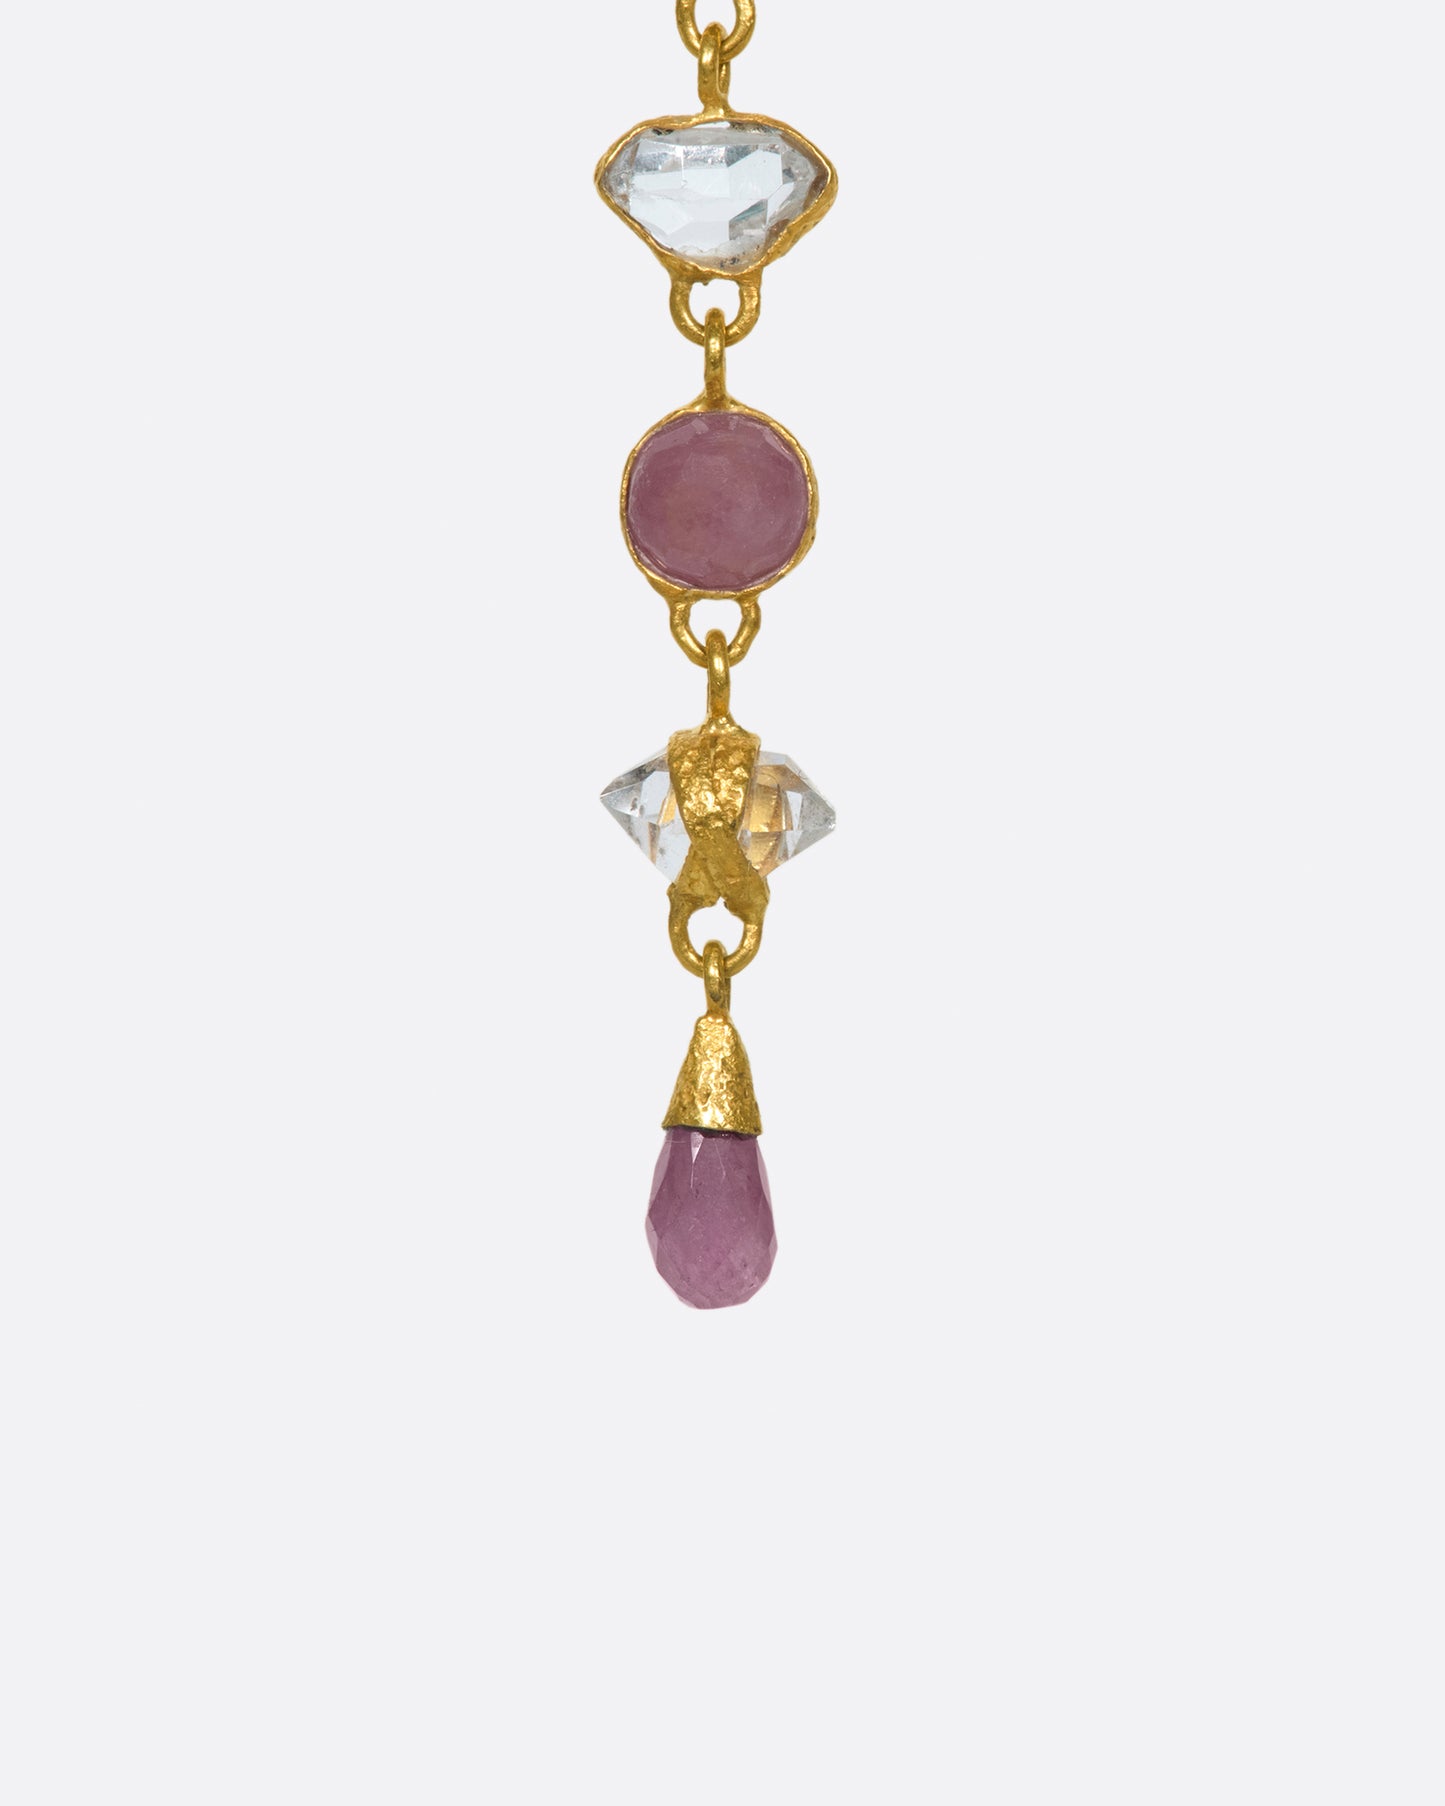 This high karat gold pendant features alternating rubies and herikmer diamonds with a matching pink sapphire drop at the bottom.